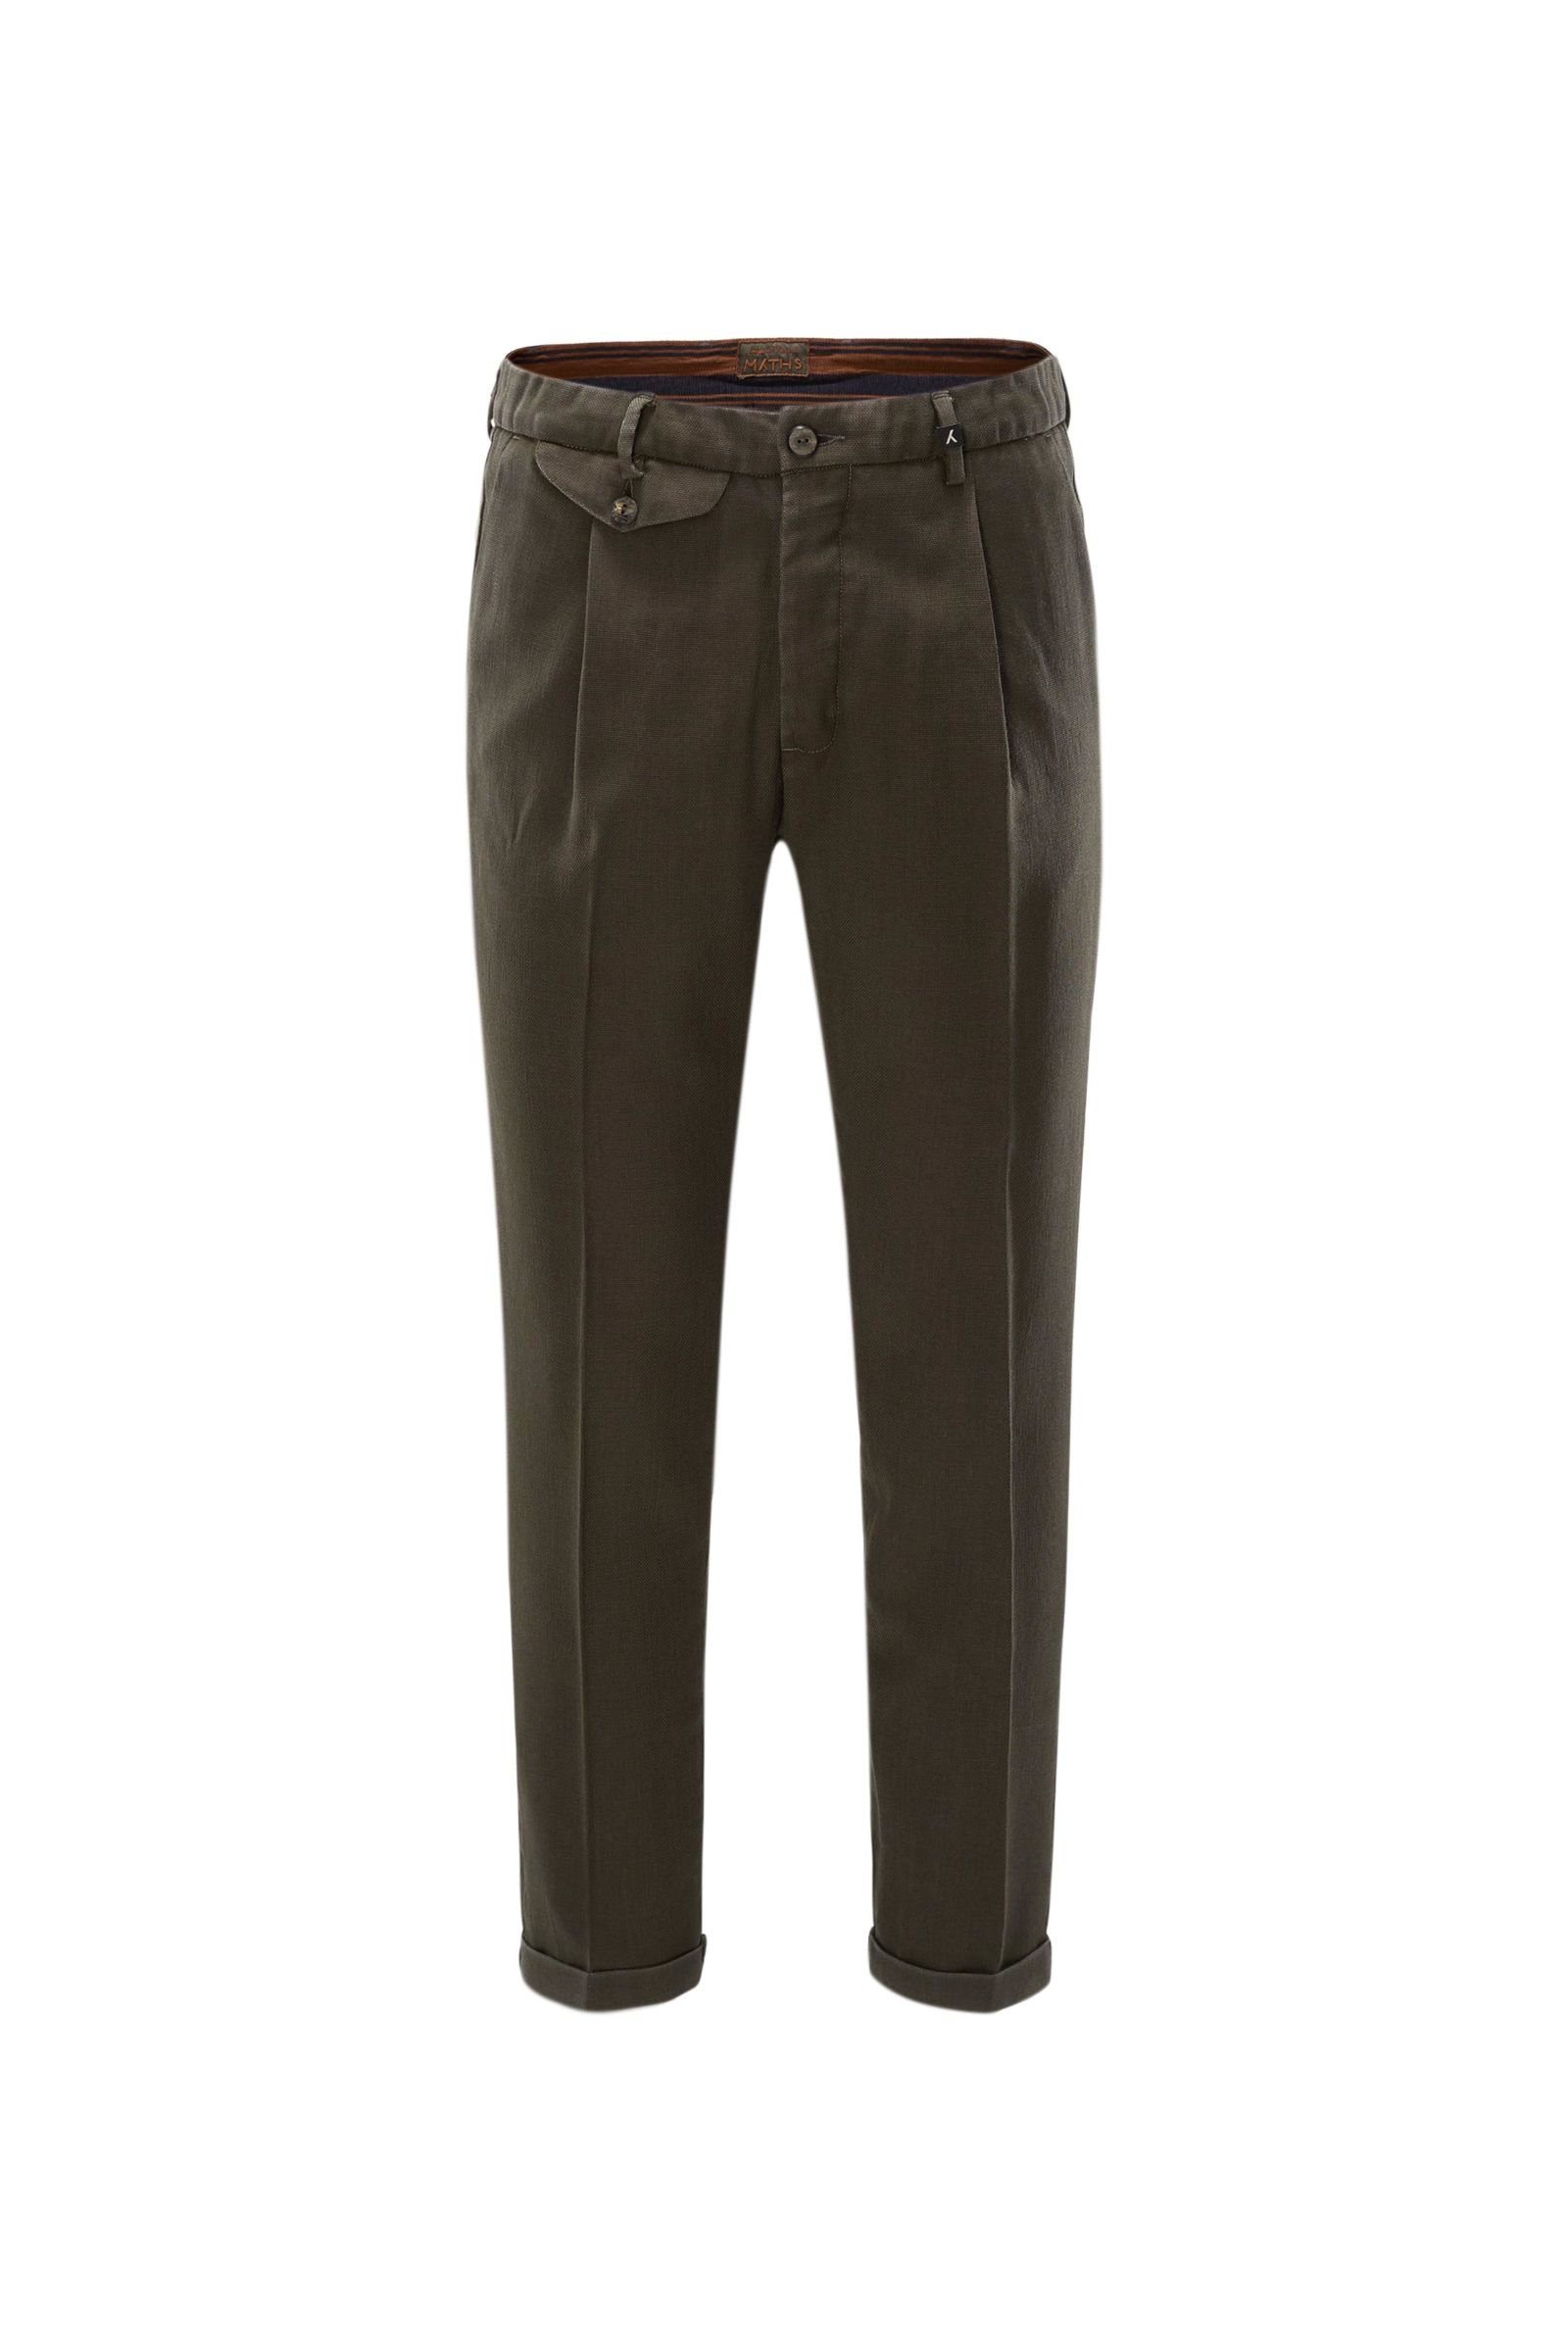 Wool trousers olive